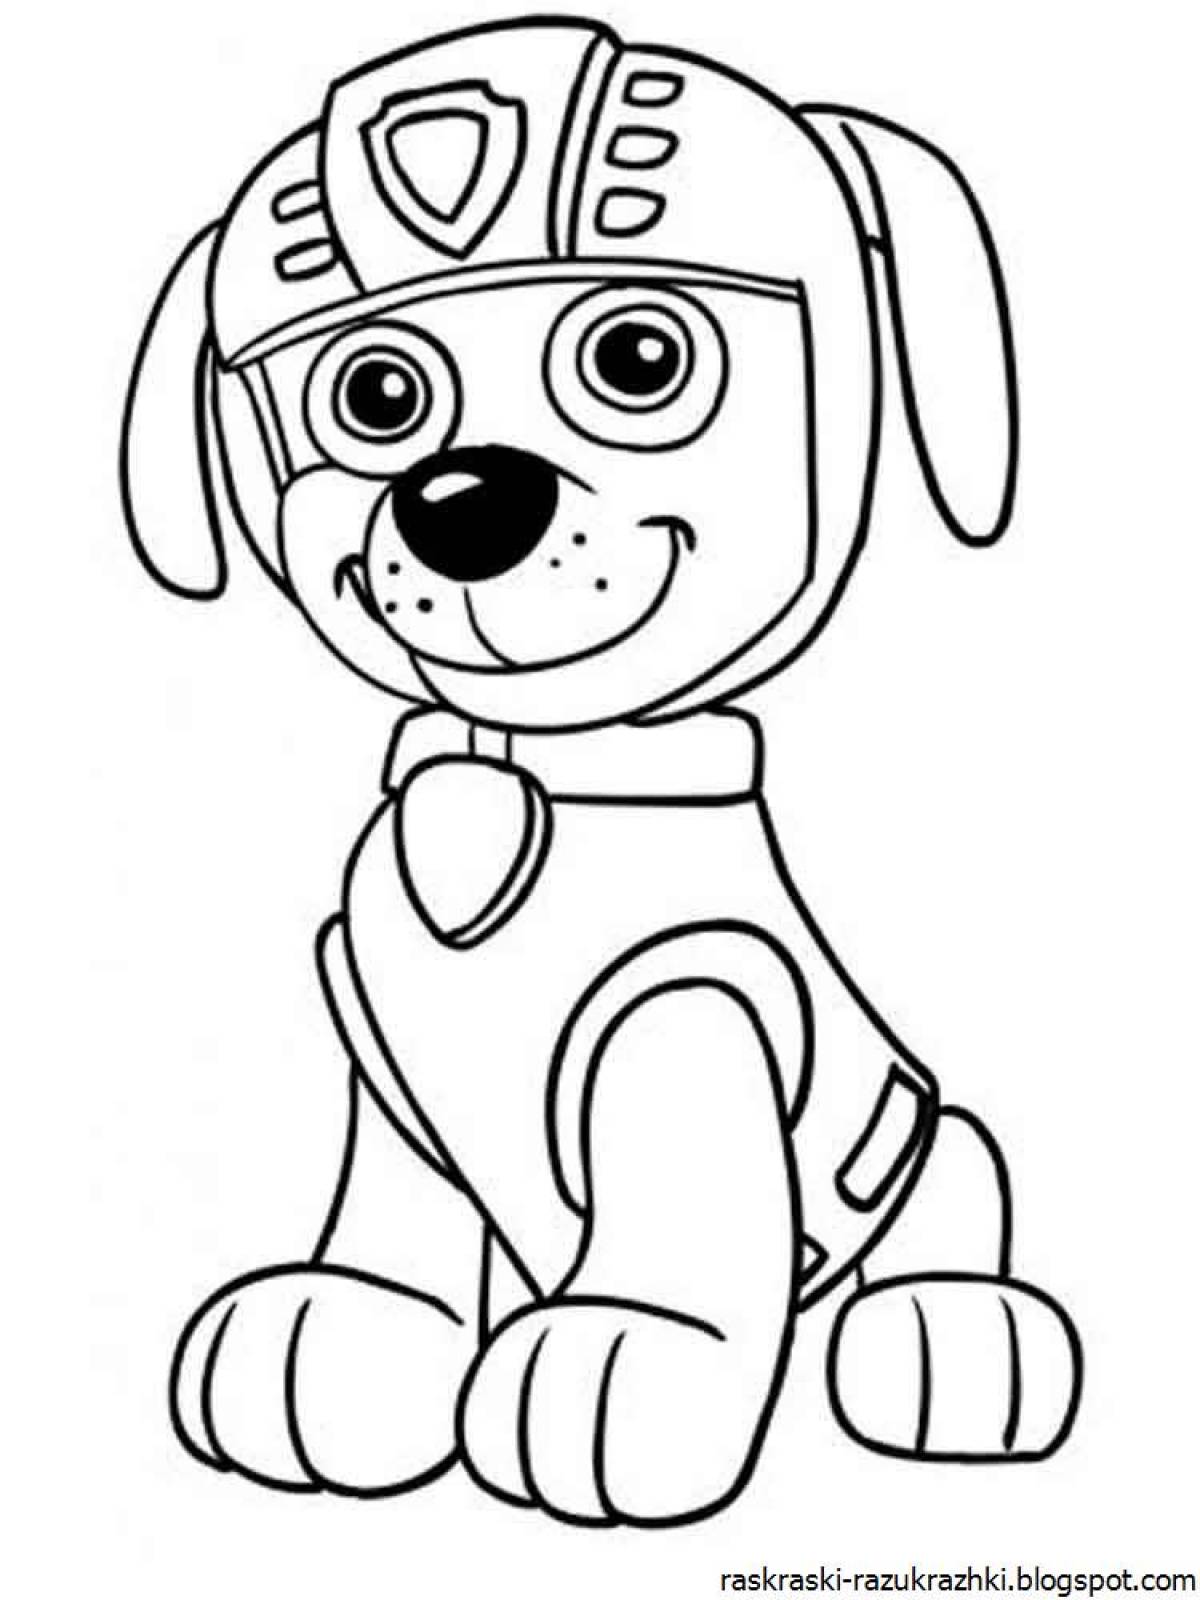 Funny Paw Patrol coloring book for preschoolers